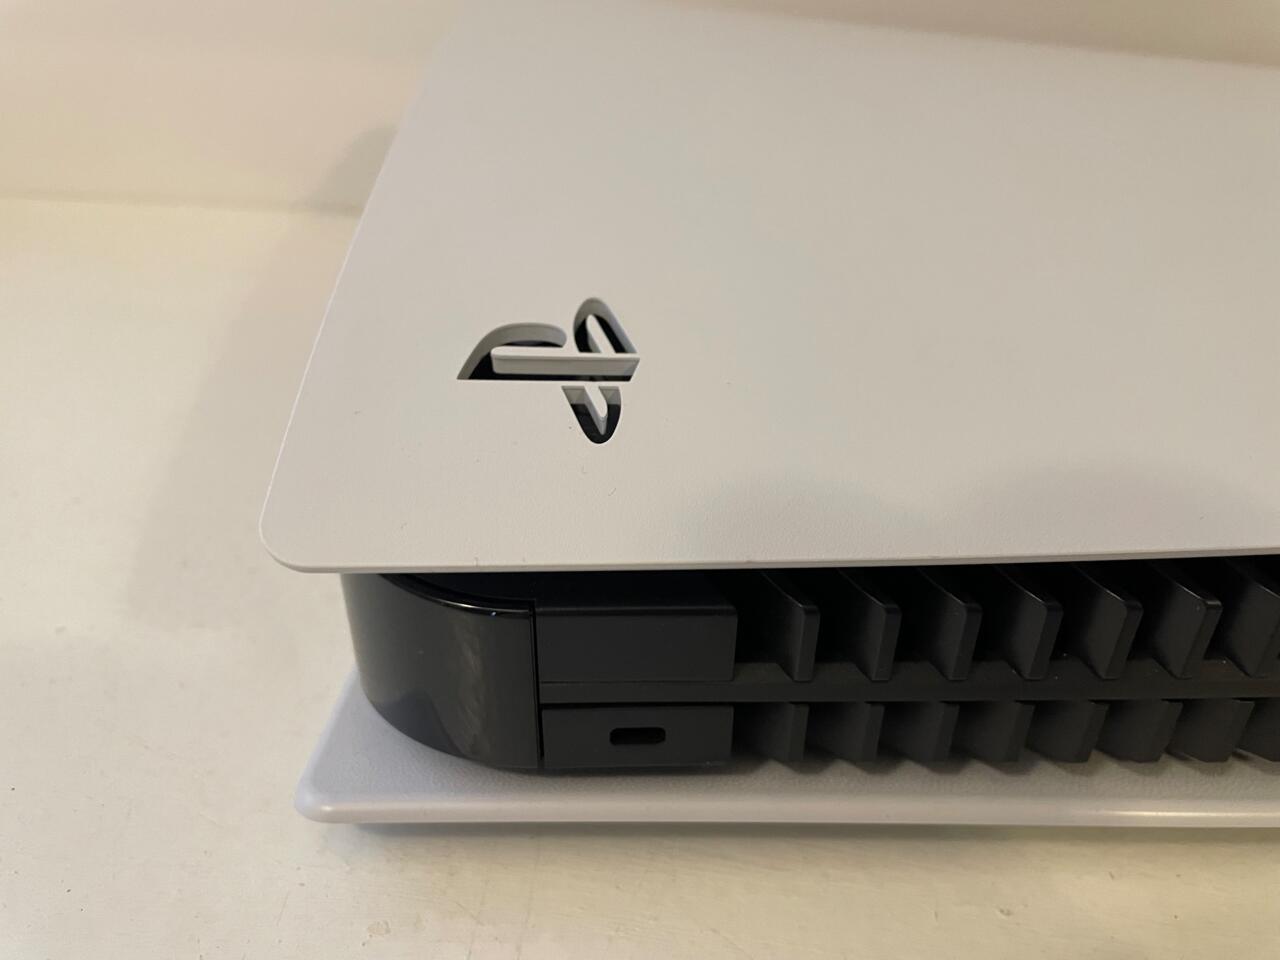 Lift and slide the corner with the PlayStation logo to remove the top plate.